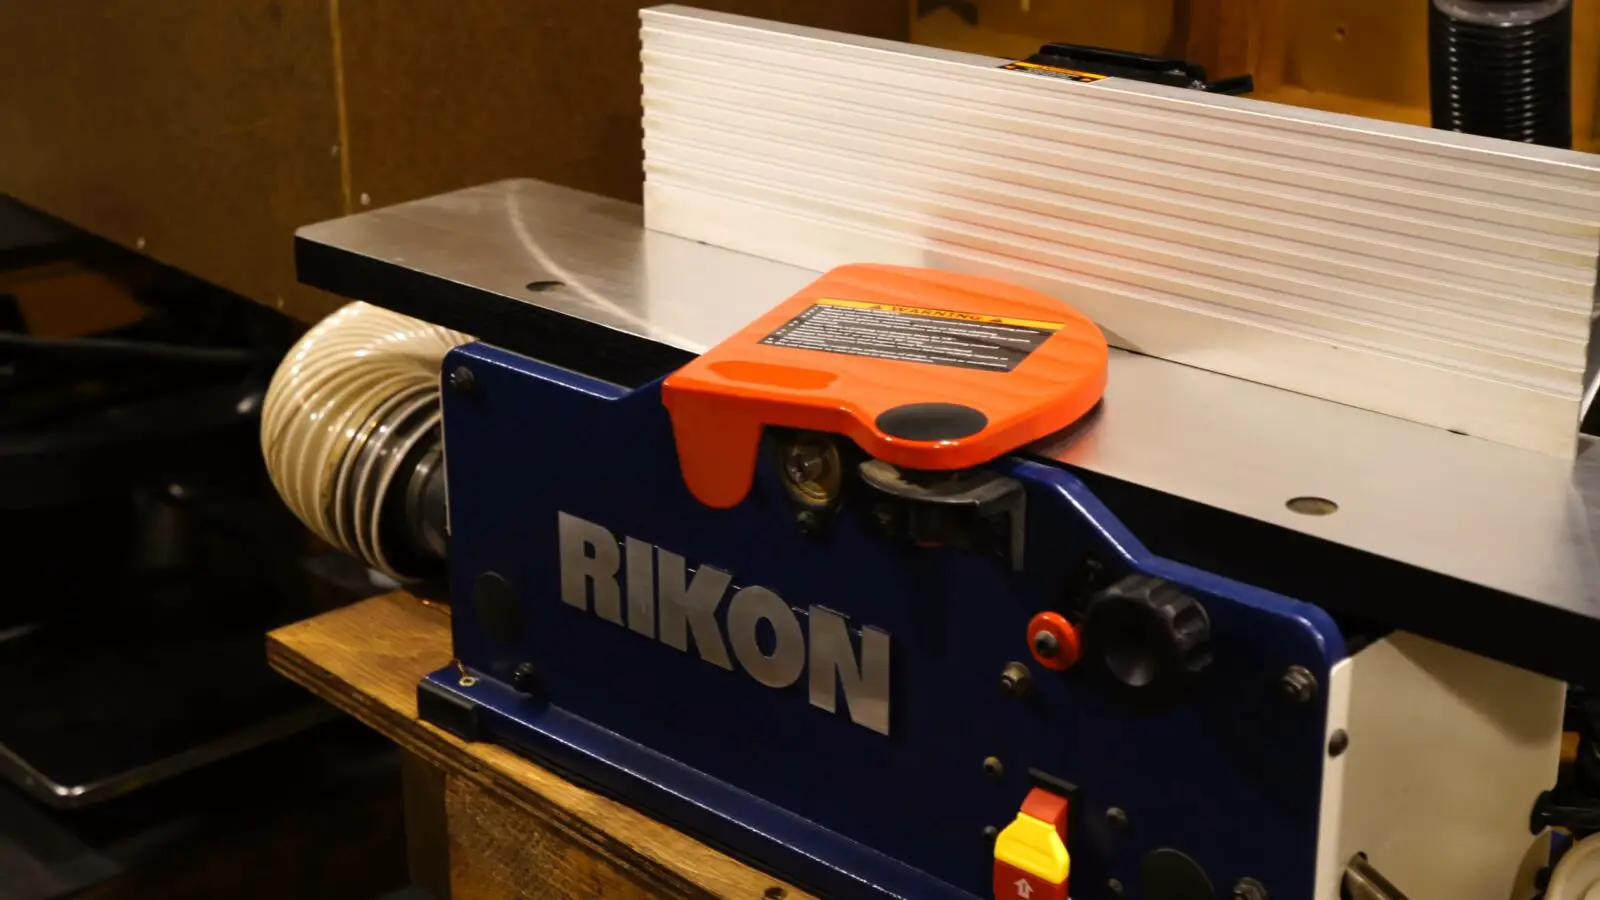 How to Use a Rikon Benchtop Jointer